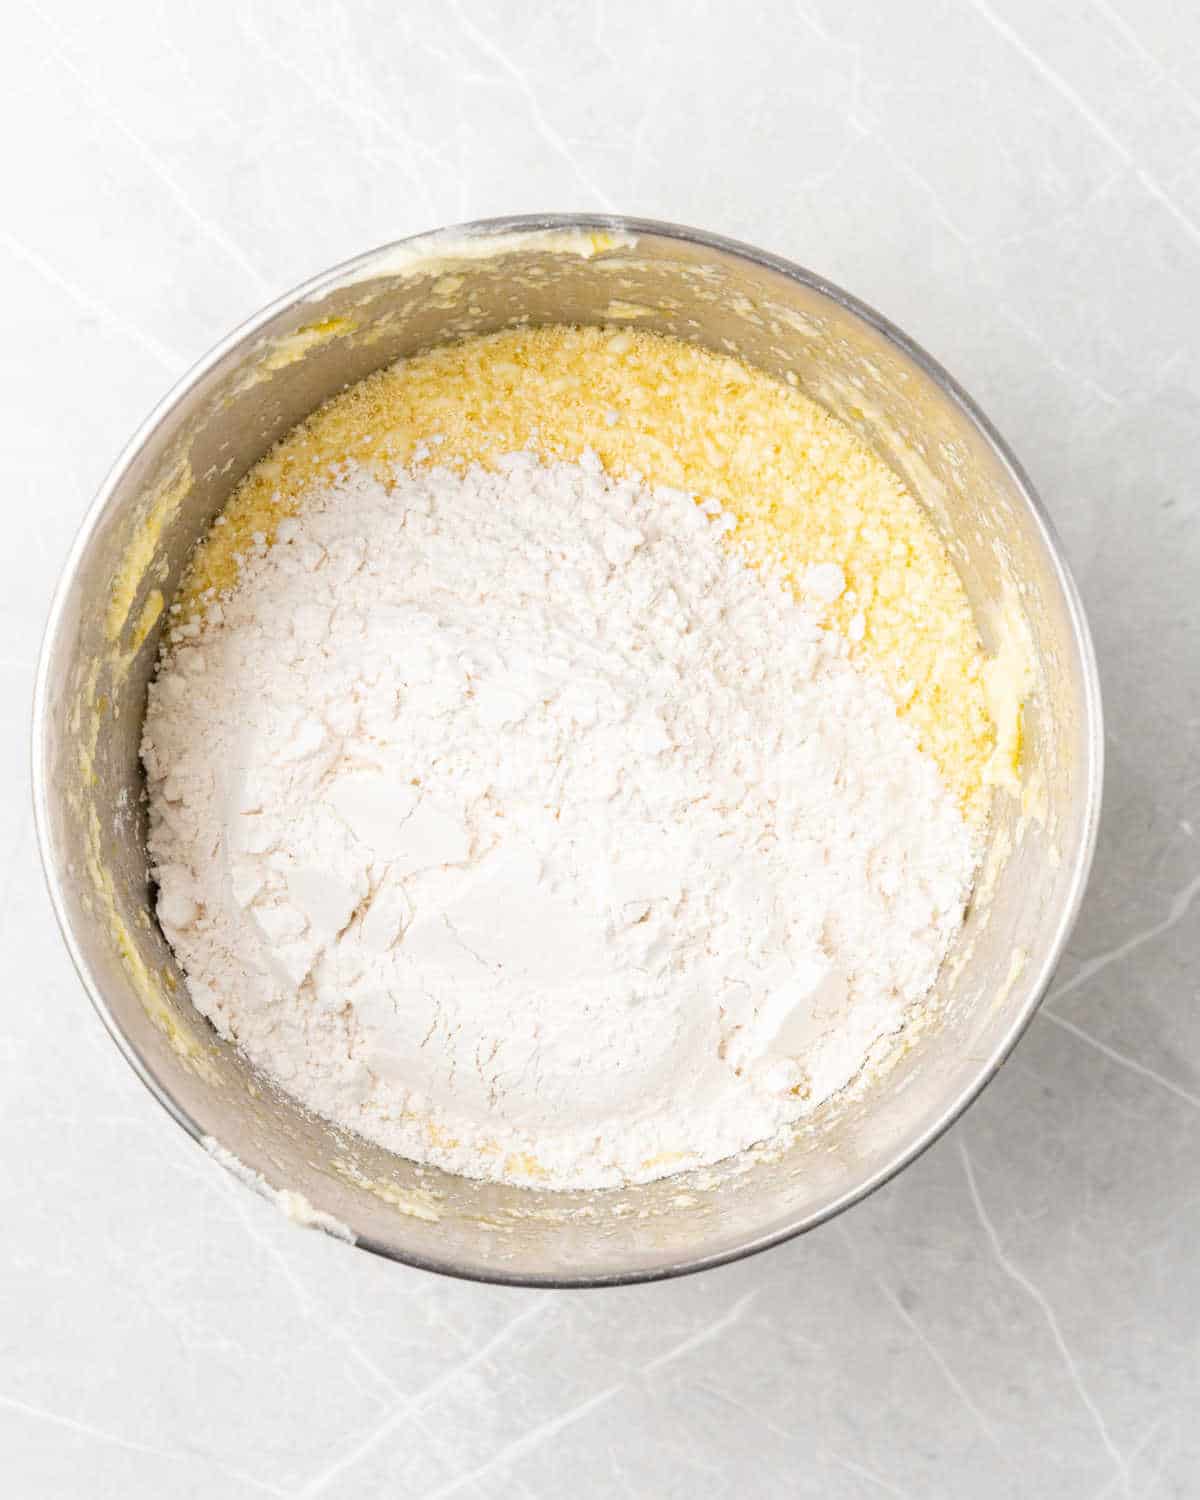 Flour added to cake batter in a metal mixer bowl on a grey surface. 